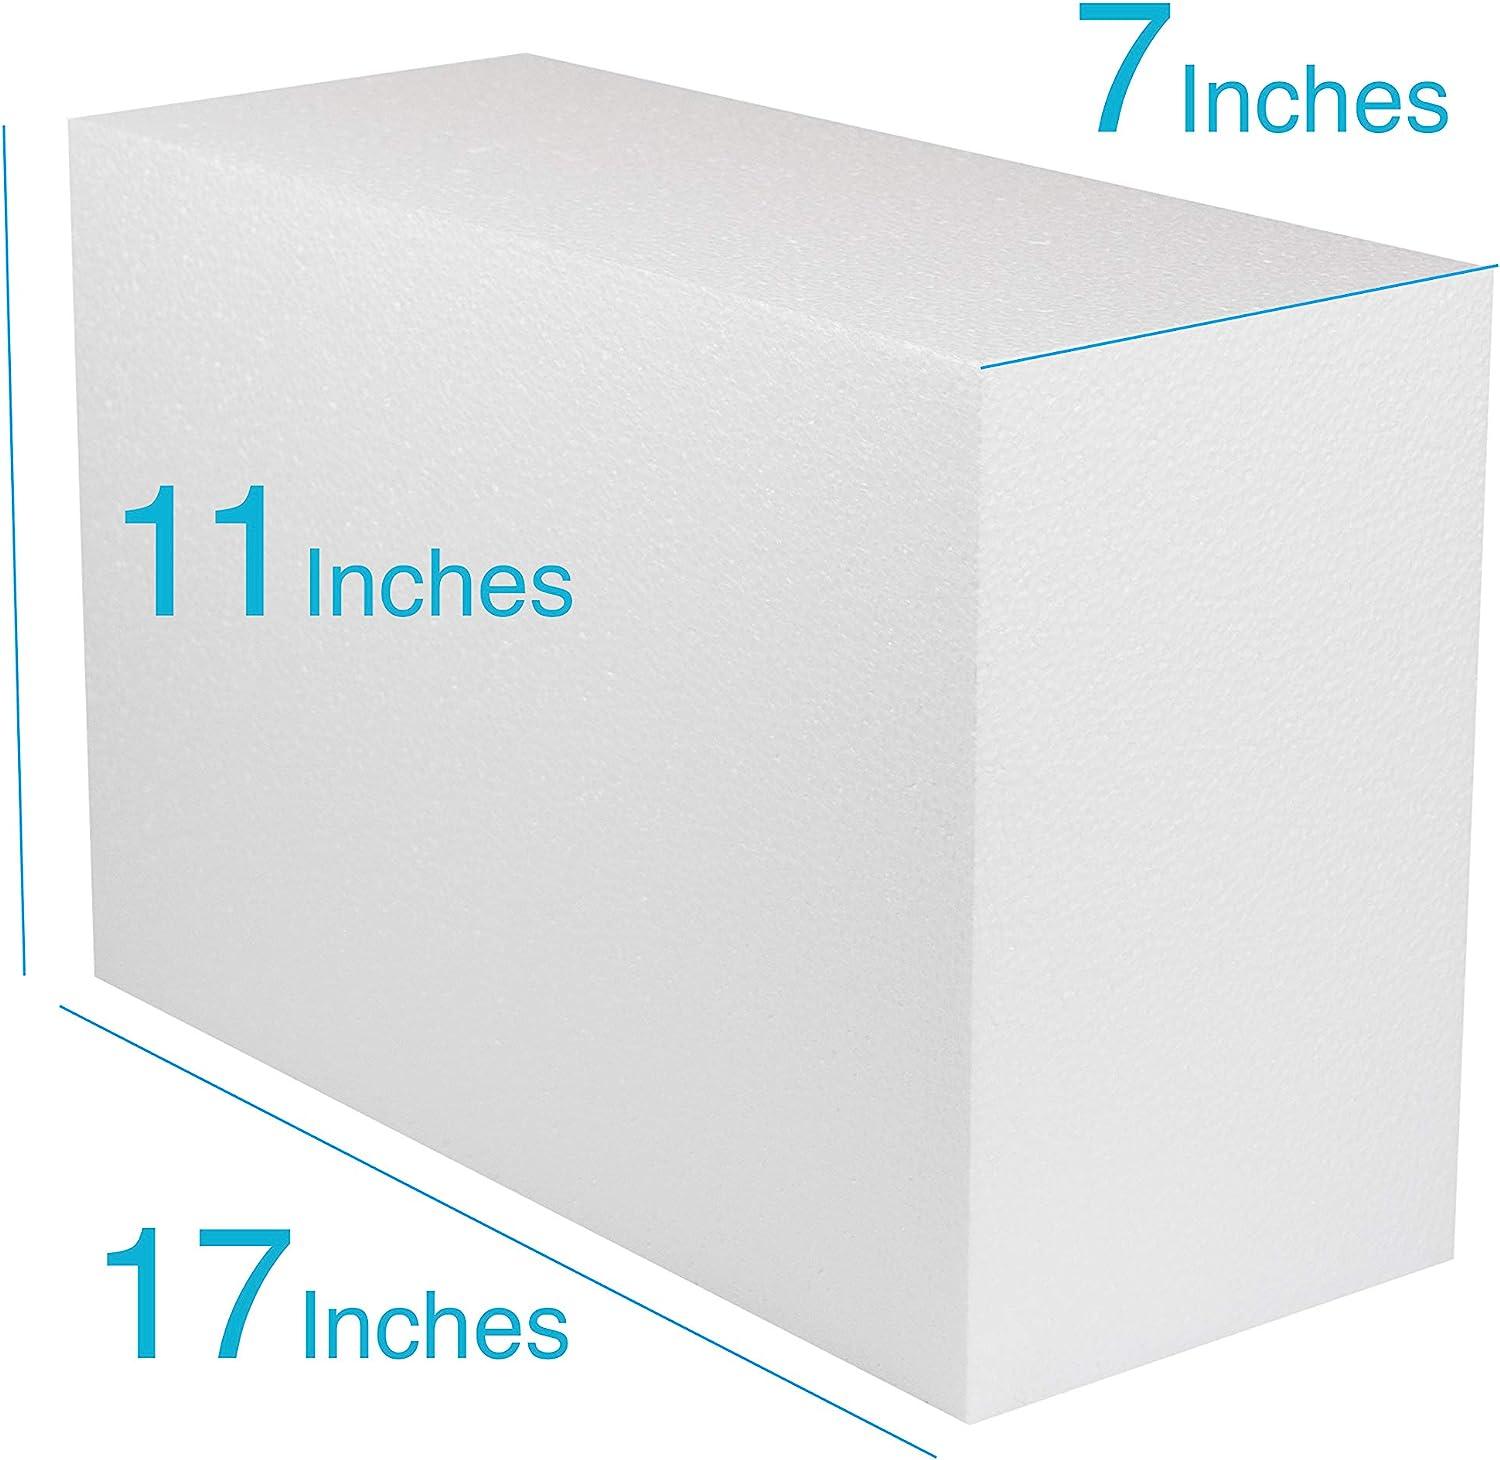 SilverlakeLLC Silverlake Craft Foam Block - 6 Pack of 5x17x1 EPS  Polystyrene Blocks for Crafting, Modeling, Art Projects and Floral